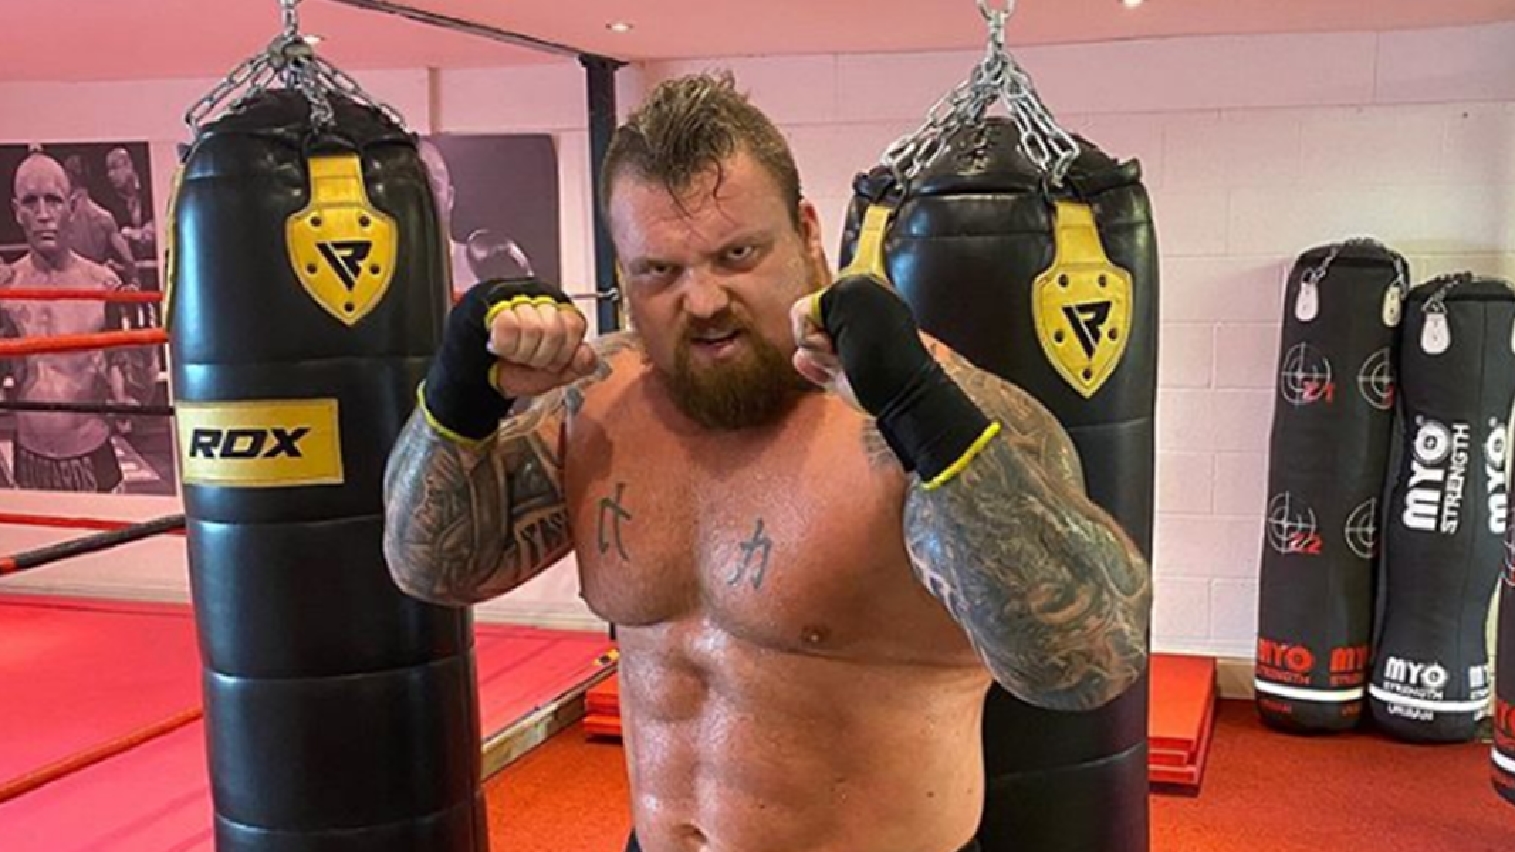 Eddie Hall claims there will “no doubt” be a rematch vs The Mountain